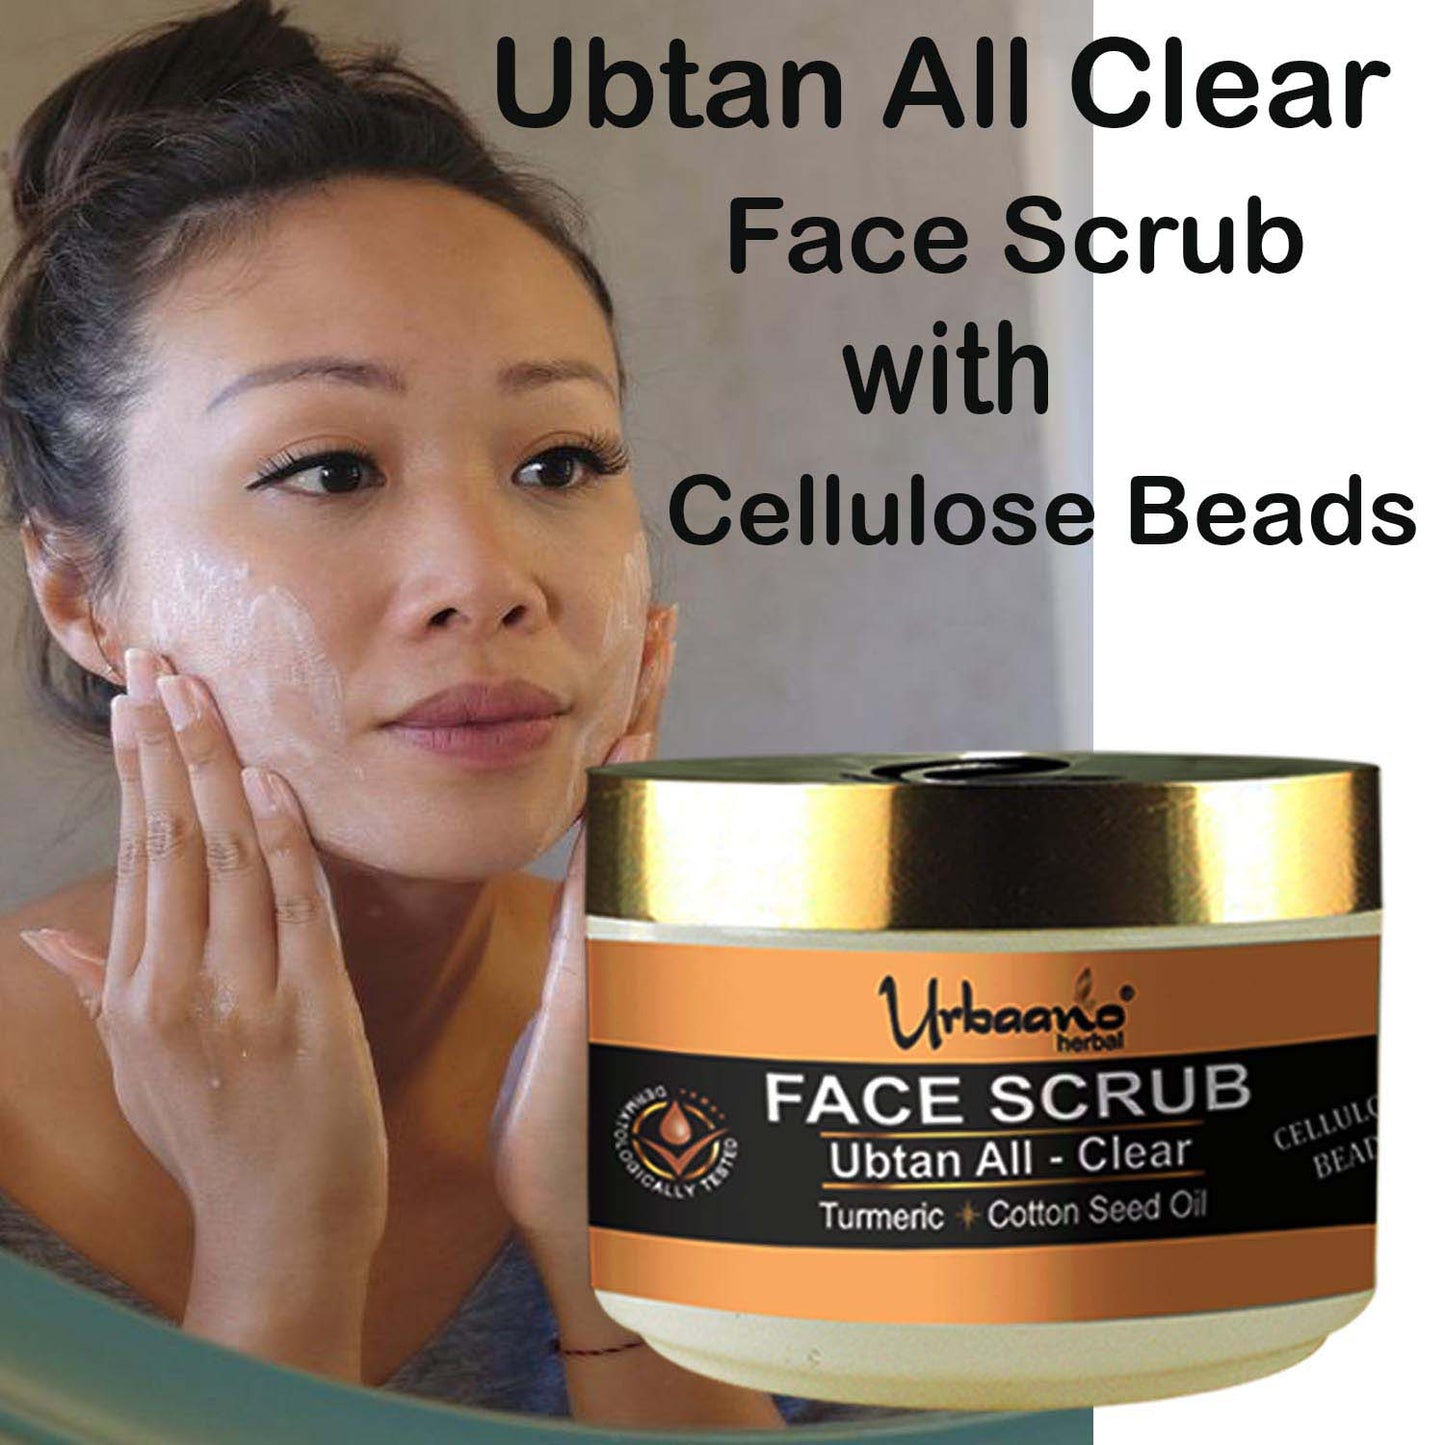 urbaano herbal facial kit ubtan all clear face scrub with cellulose beads, turmeric & cotton seed oil